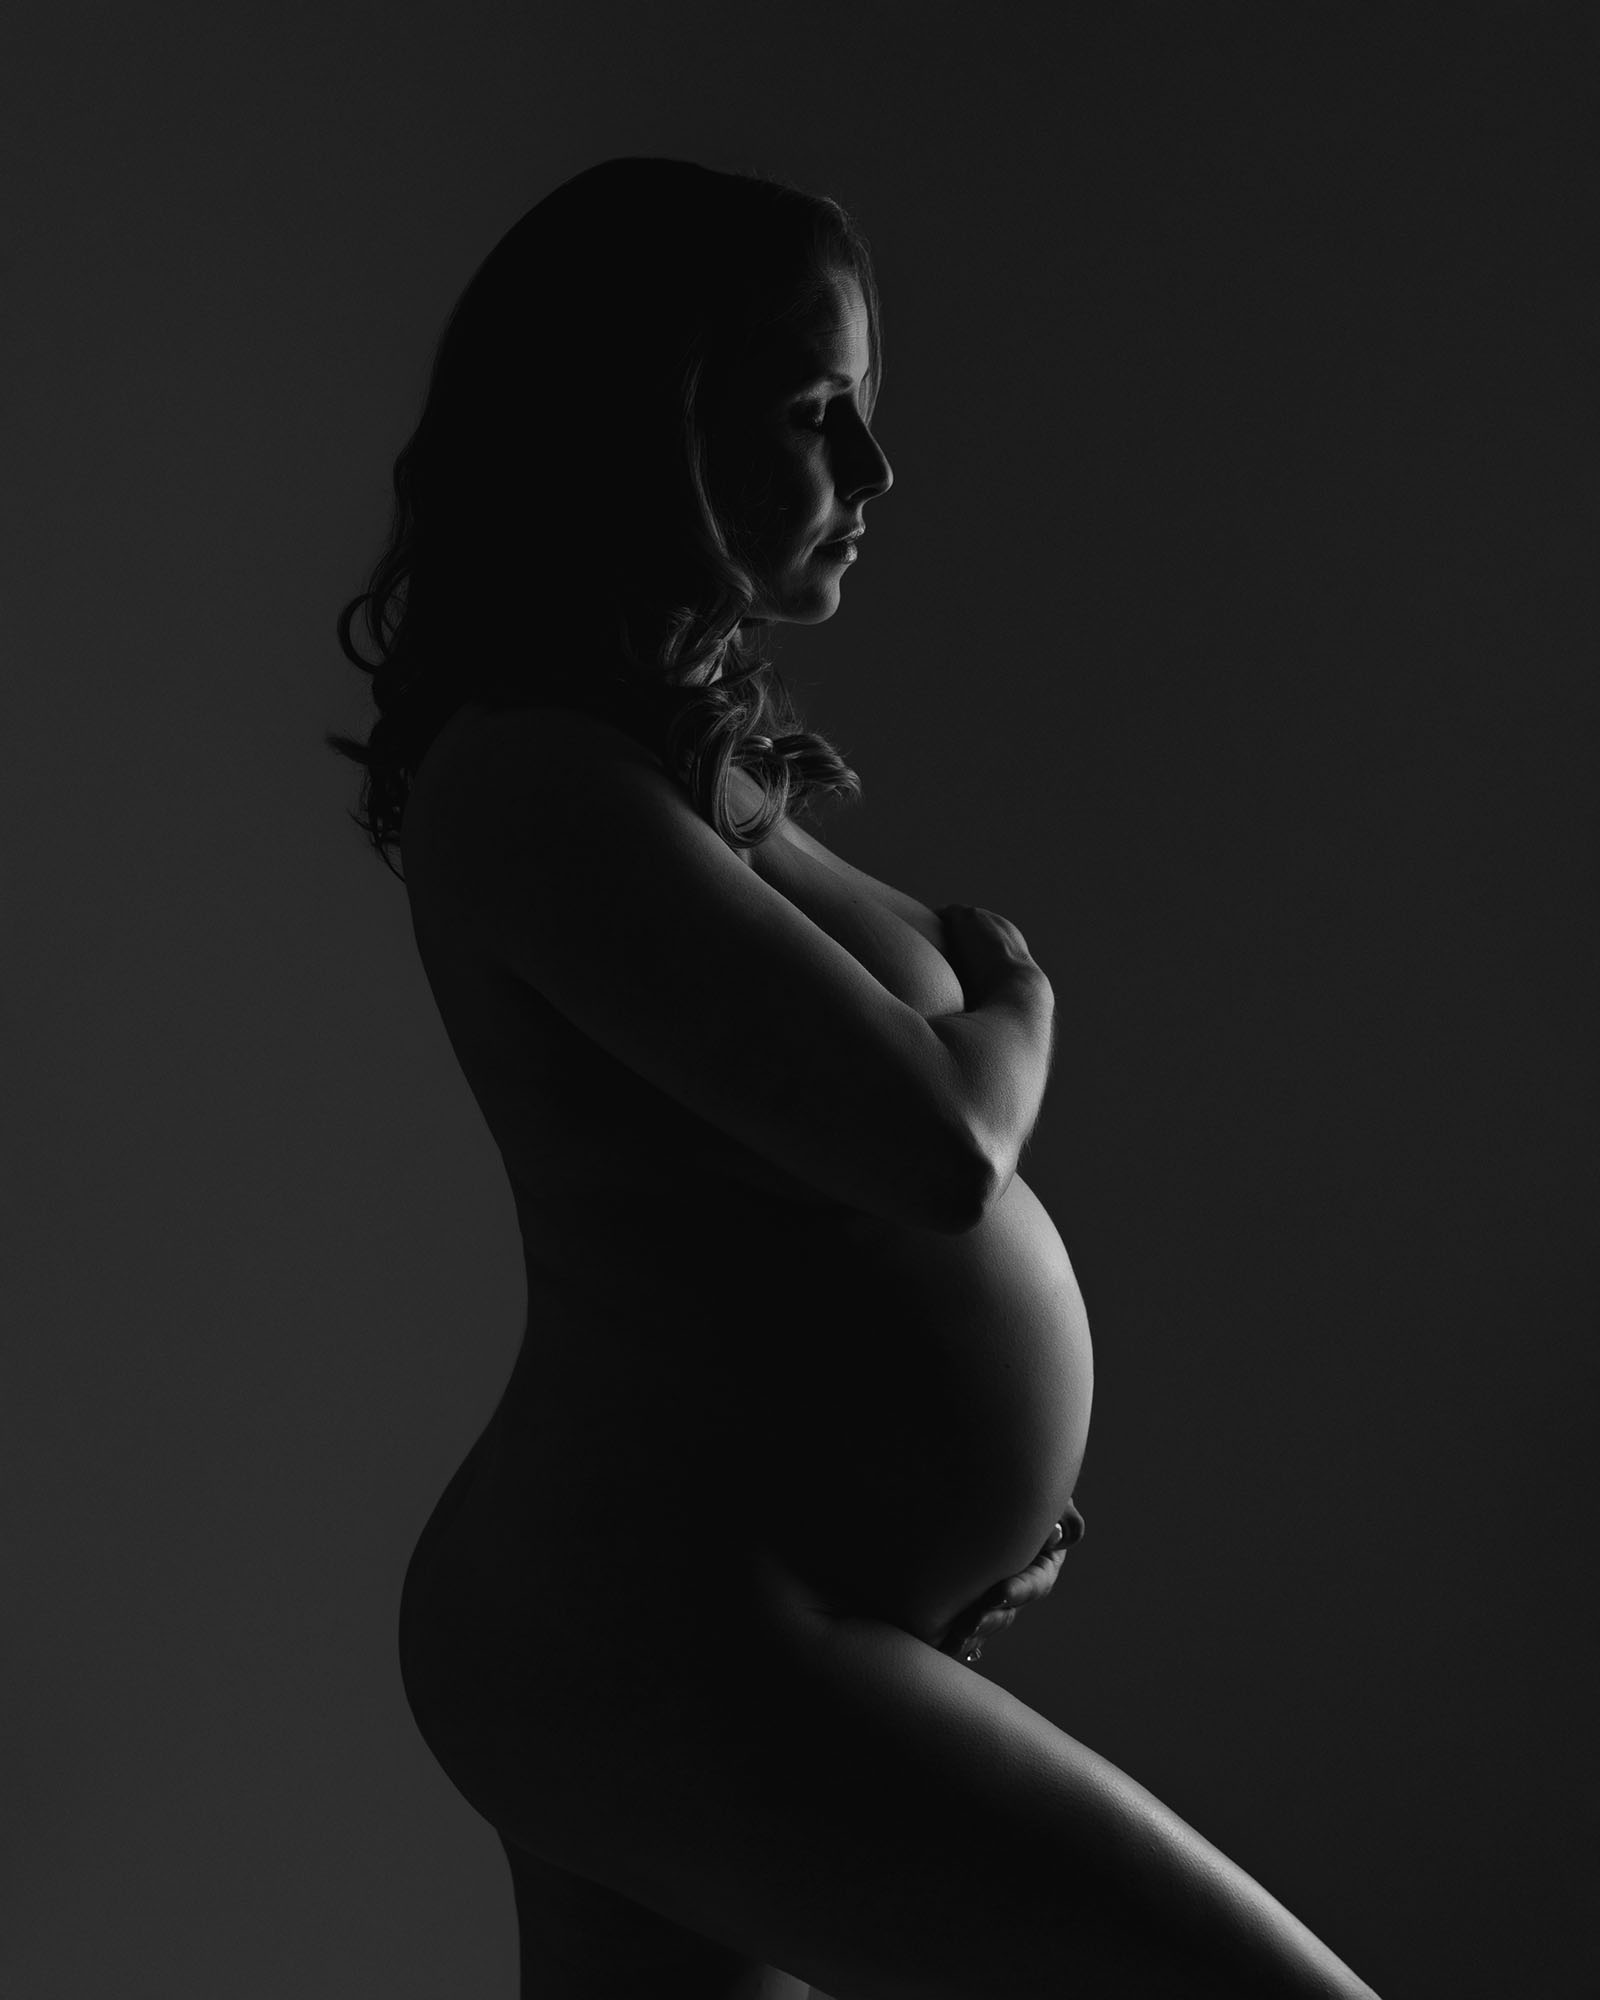 Winchester maternity photographer.  Nude pregnant woman in black and white at her maternity session